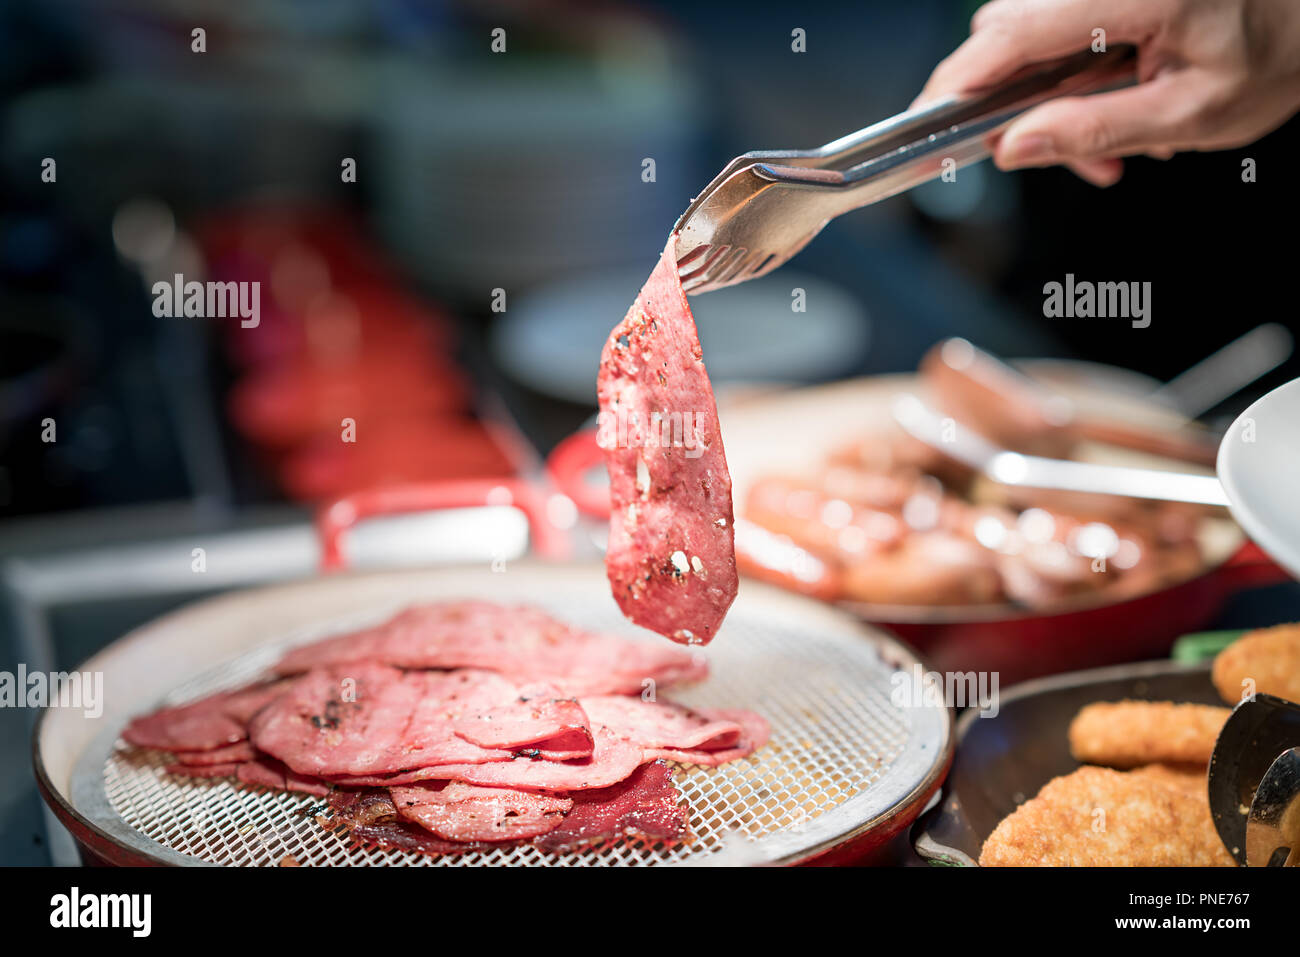 Human hand holding tongs over plate of sliced smoked meat in bar at restaurant in hotel. Breakfast appetizer in plate. Stock Photo